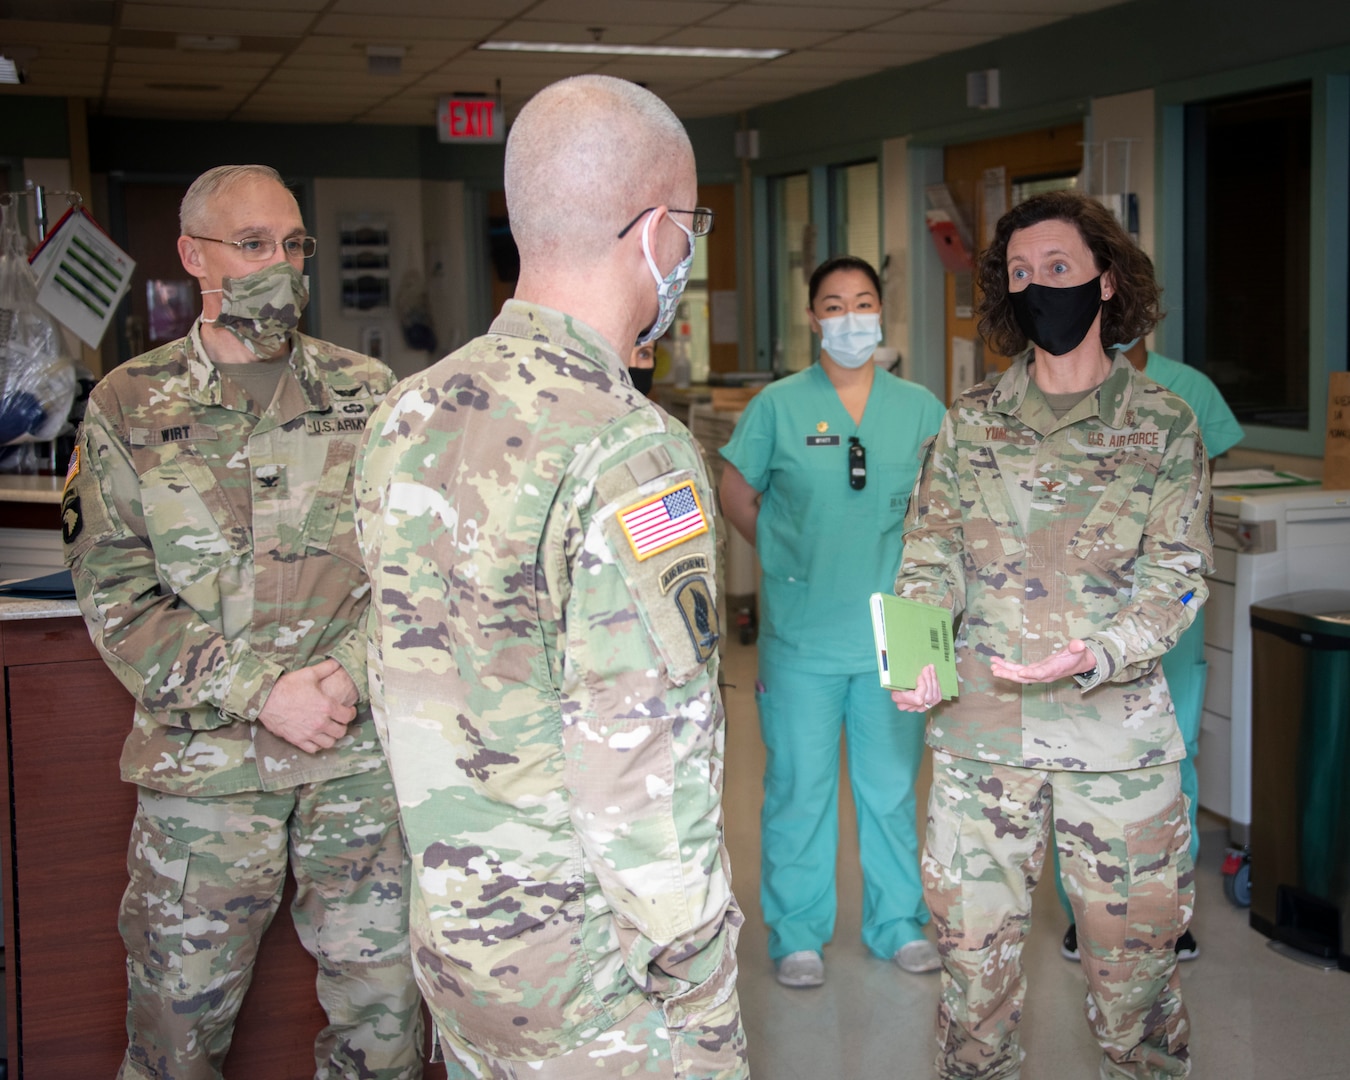 Air Force Col. Heather Yun, Deputy Commander for Medical Services, talks to Army Lt. Gen. Ronald Place, Director, Defense Health Agency, at Brooke Army Medical Center, Fort Sam Houston, Texas, Jan. 20, 2021.